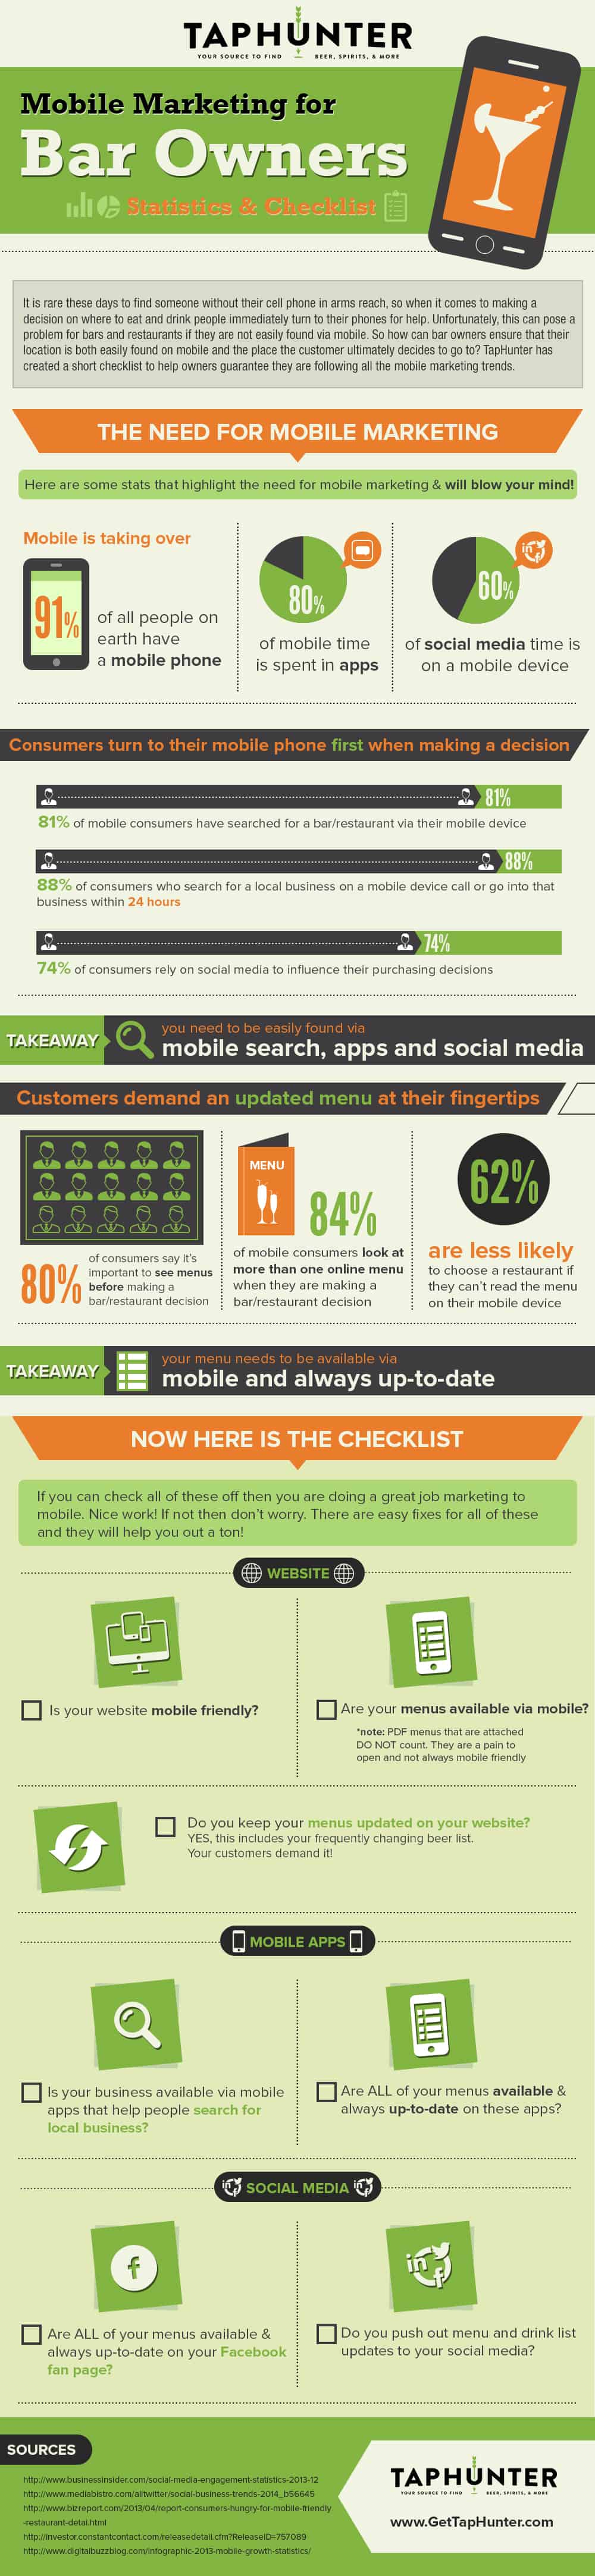 Mobile Marketing for bar owners [INFOGRAPHIC]